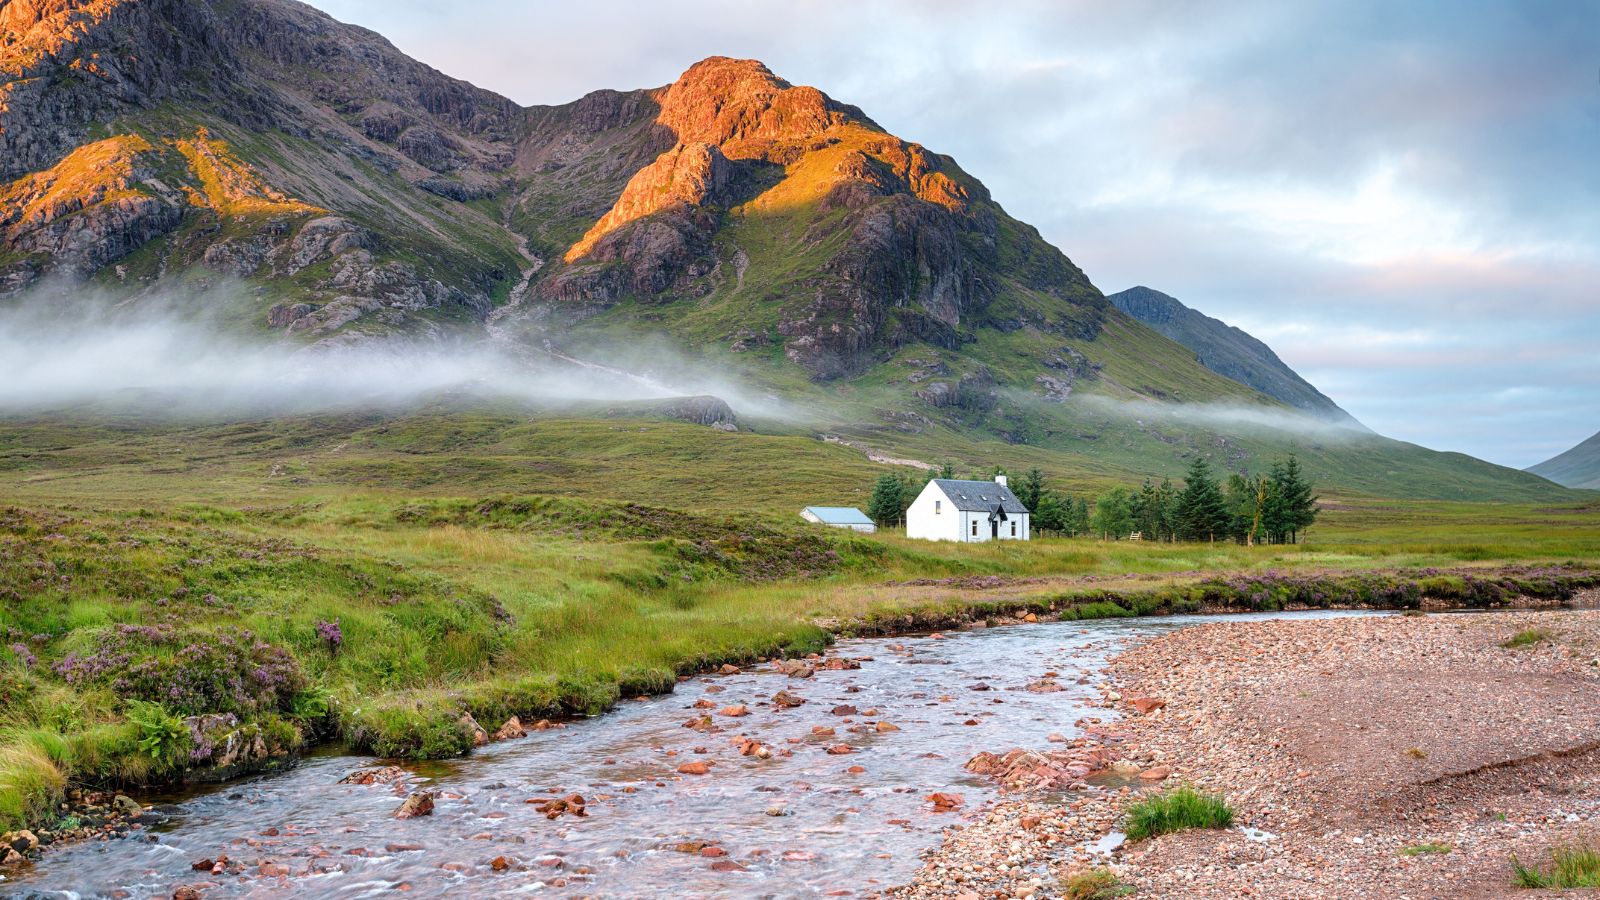 <p>If you do take advantage of the right to roam, keep an eye out for Scotland’s <em>bothies</em>. Located across the country in remote destinations, these simple shelters (“bothan” is the Gaelic word for hut) are available for anybody to stay in for free.</p><p>They’re generally unlocked and have a sleeping platform, table and chairs, and somewhere to light a fire (although not necessarily any wood to burn). With no electricity, toilet, or running water, bothies are by no means luxurious. But this free shelter in wild, beautiful, and inaccessible places will feel amazing – especially if it’s raining.</p>